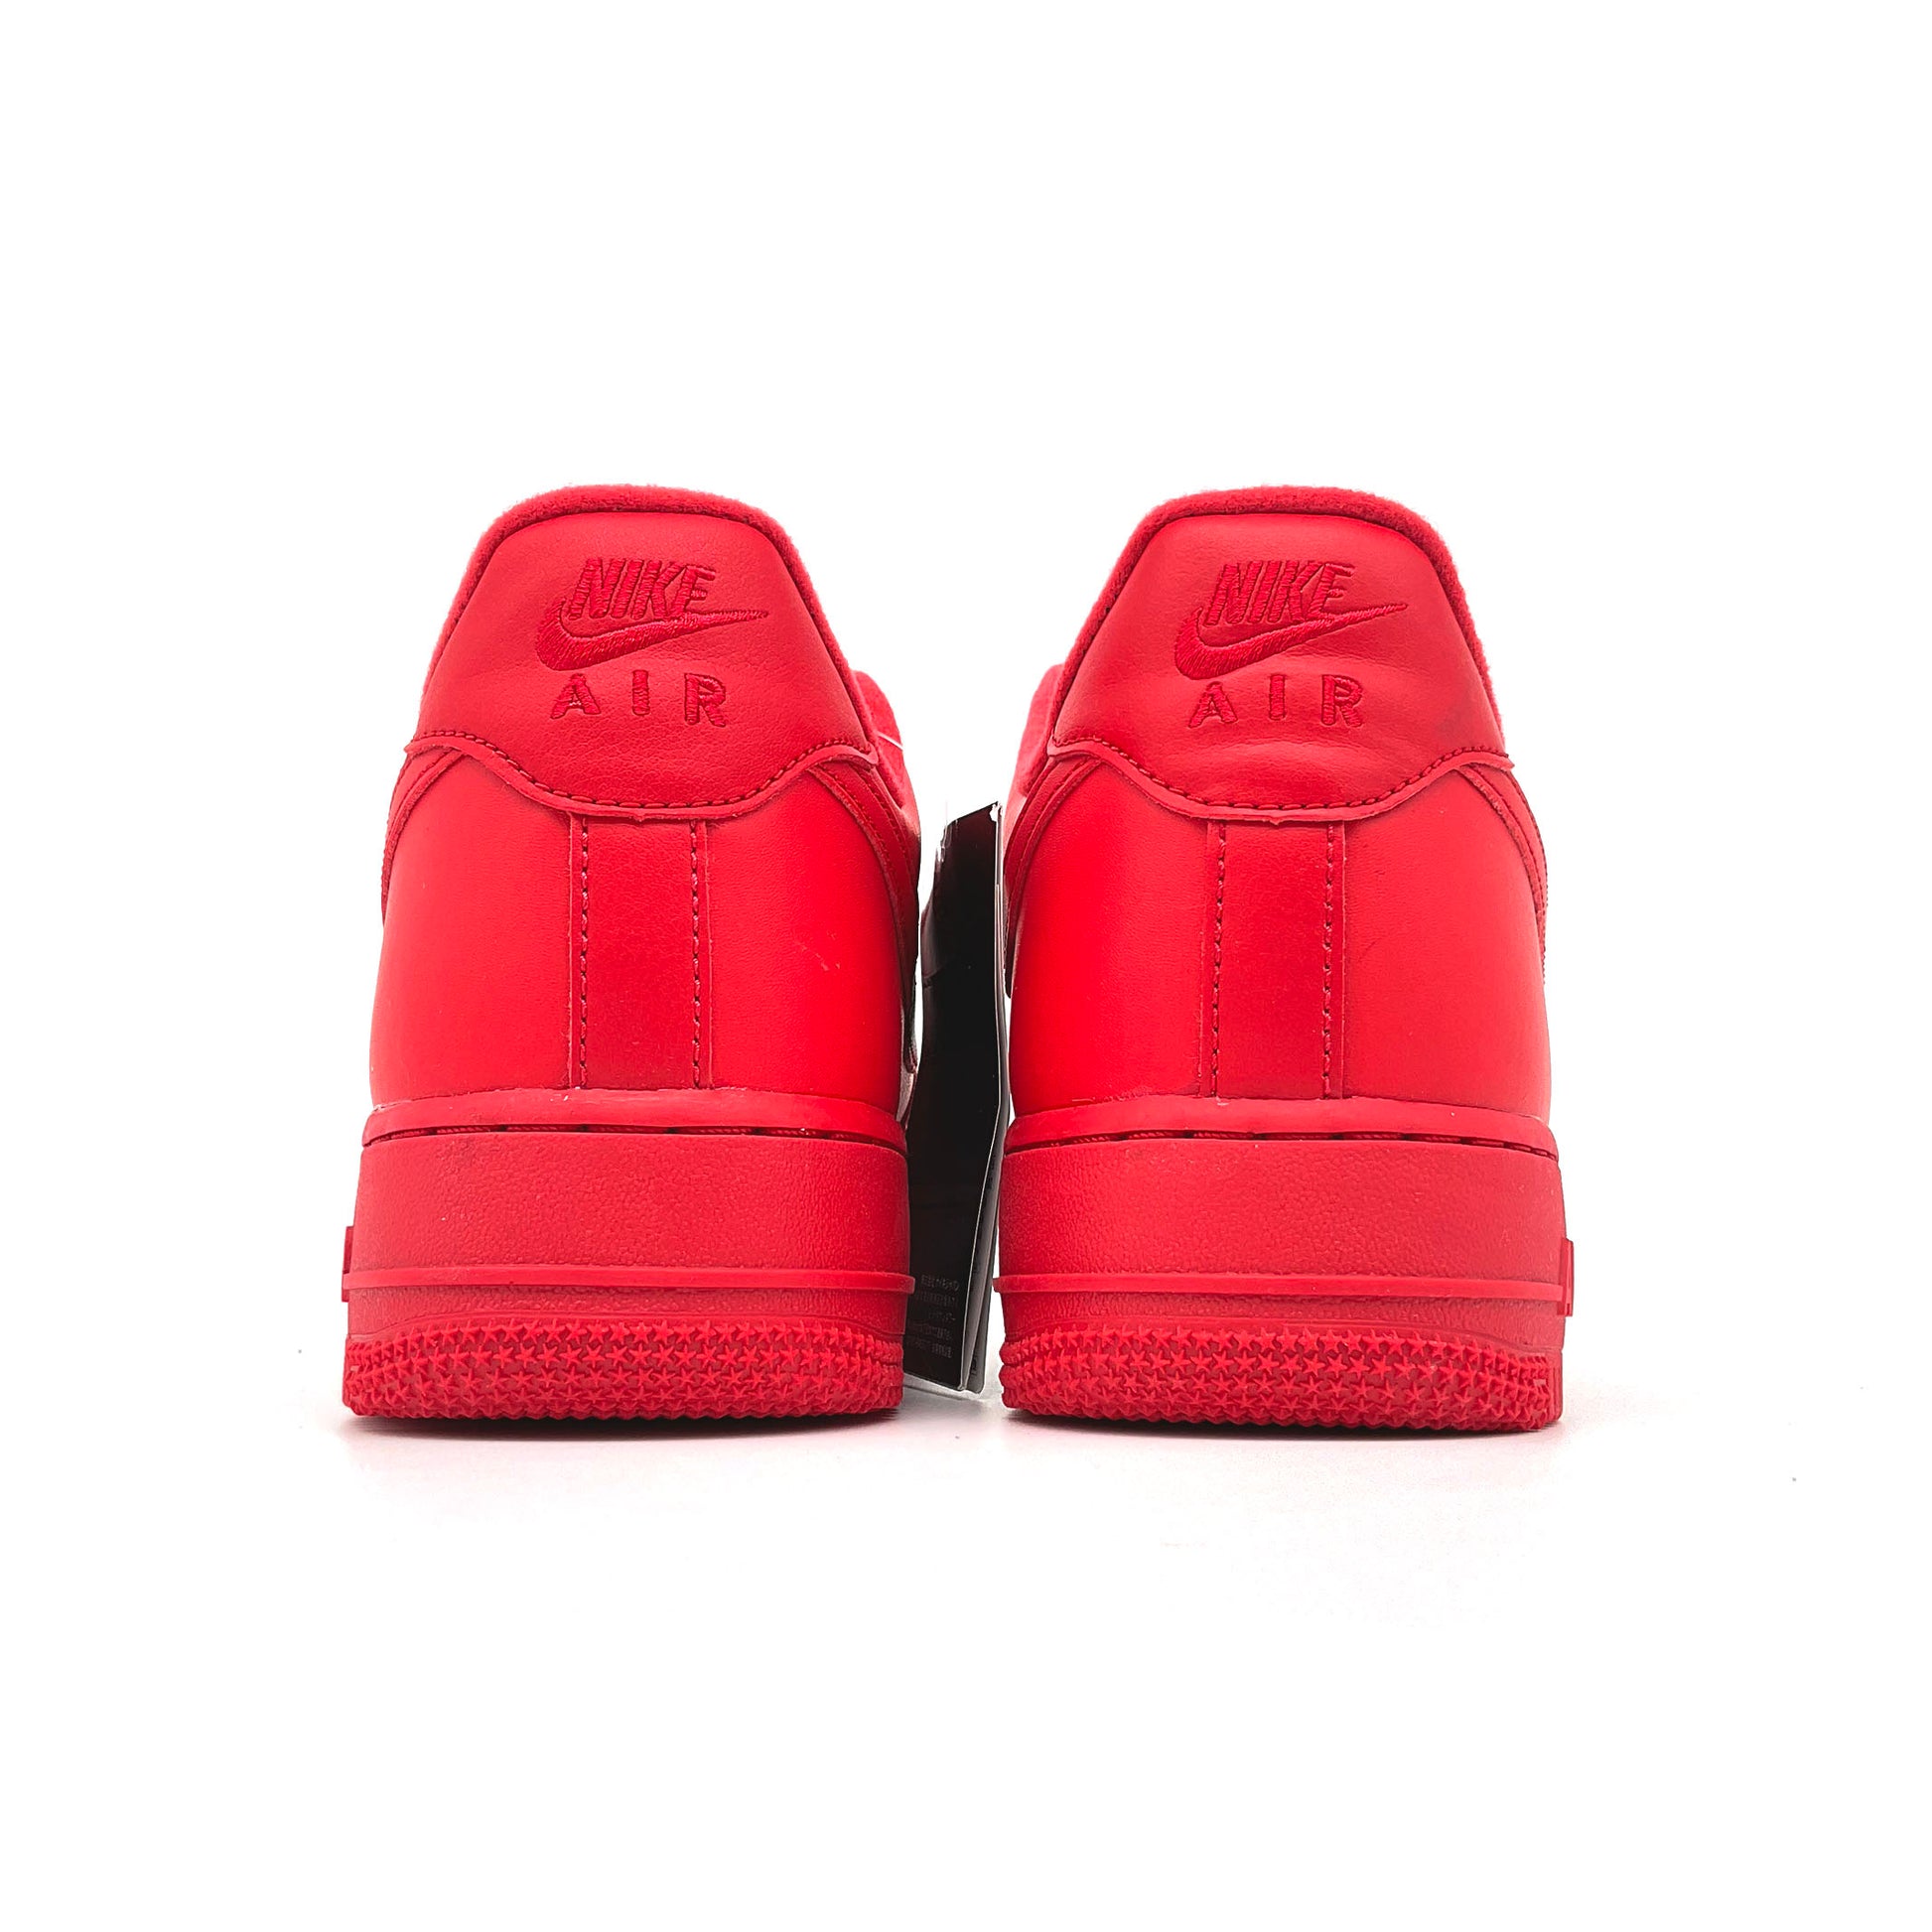 NIKE AIR FORCE 1 '07 LV8 1 “TRIPLE RED” – FOOT FIRST